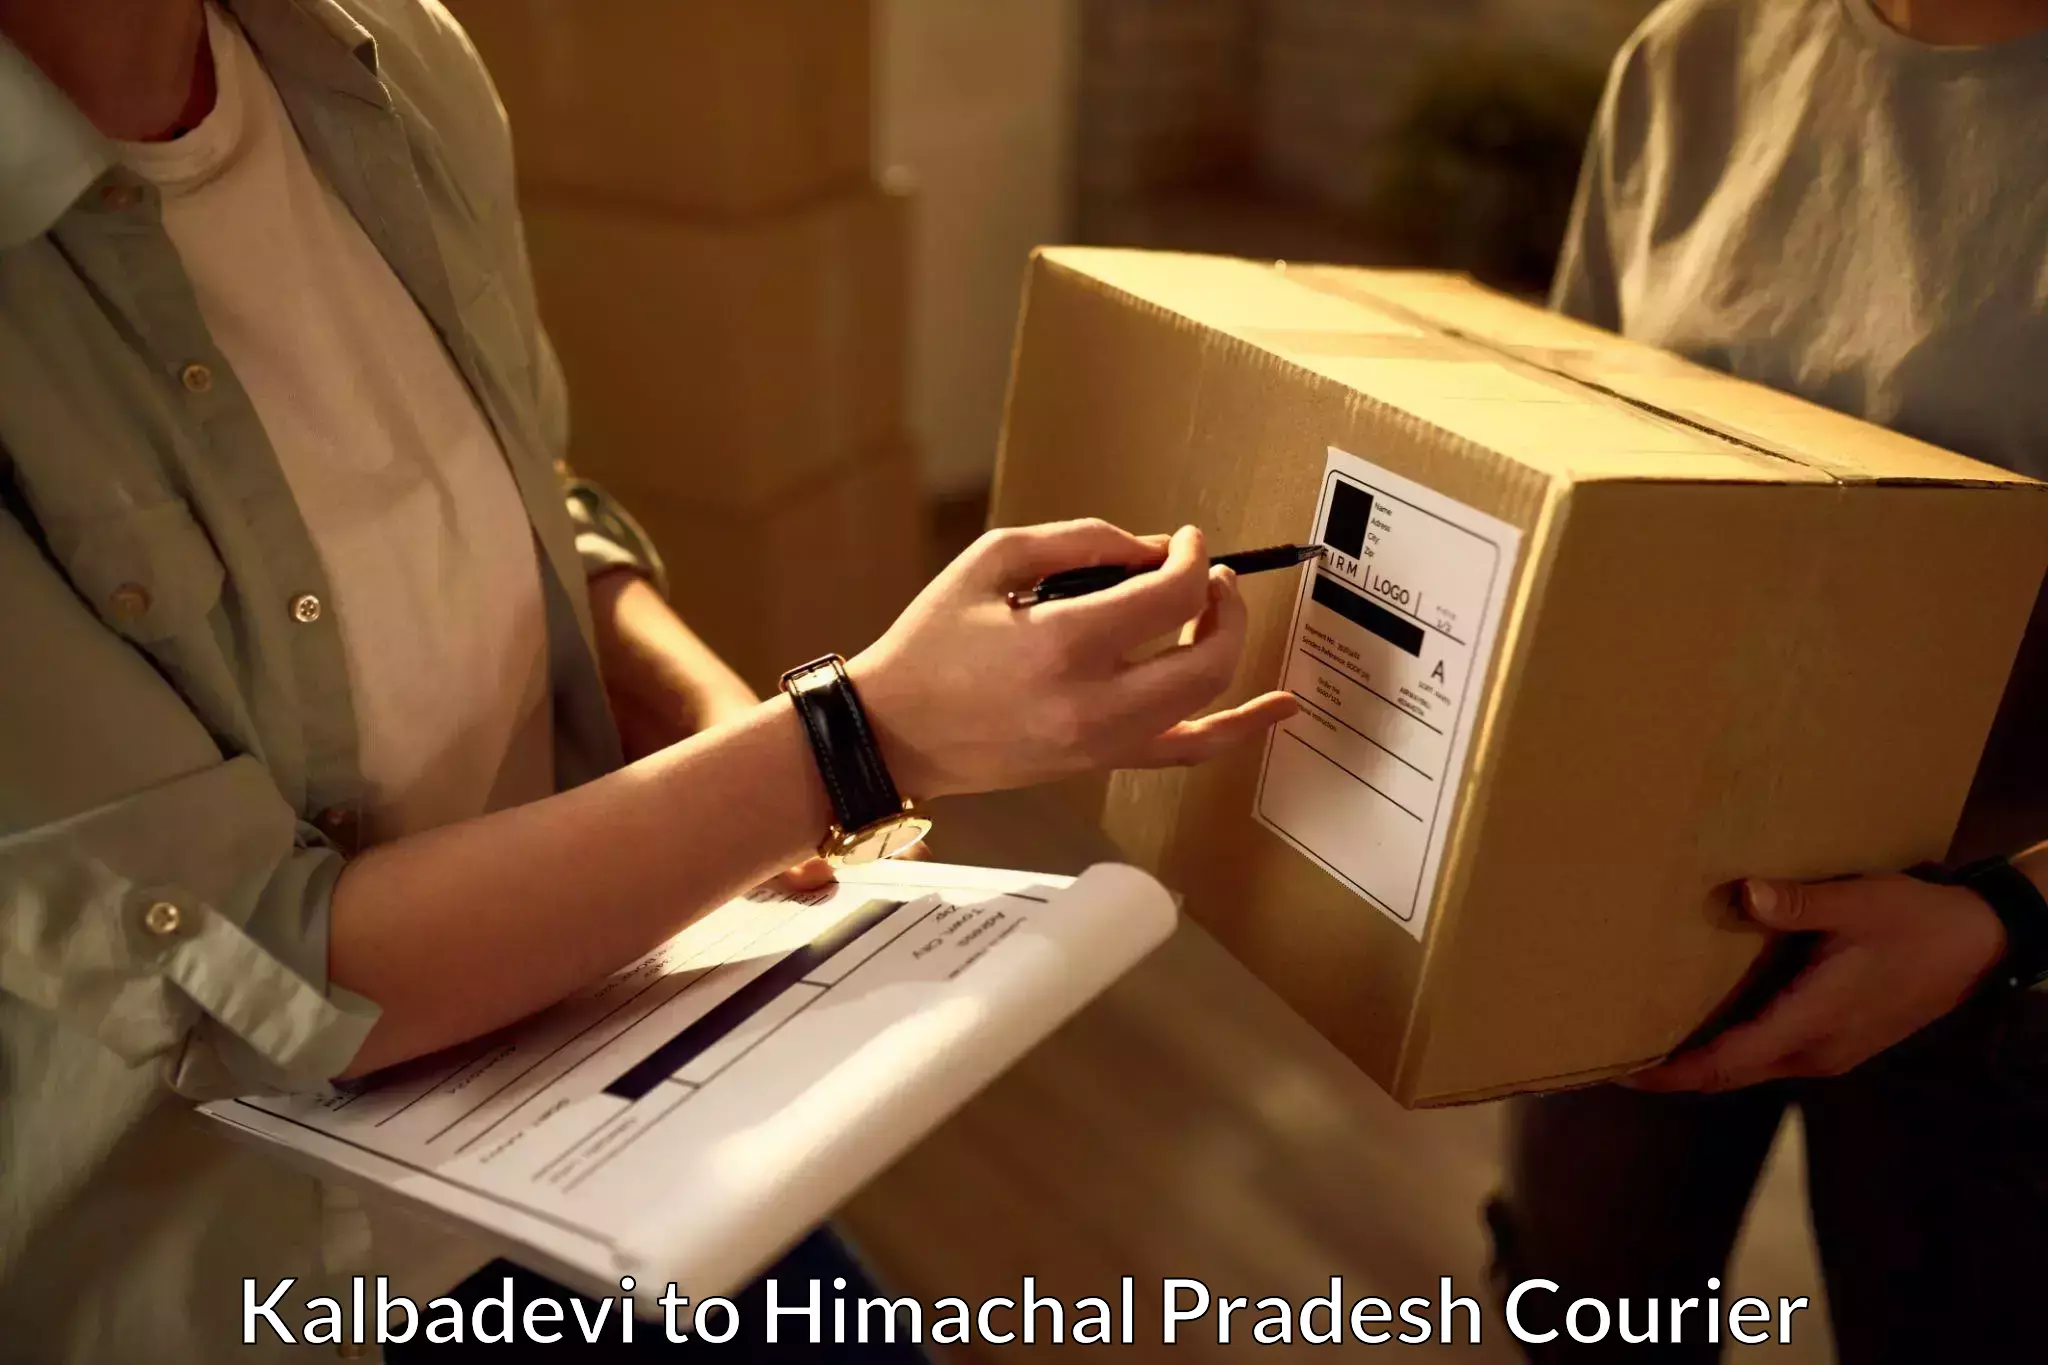 Package delivery network Kalbadevi to Himachal Pradesh